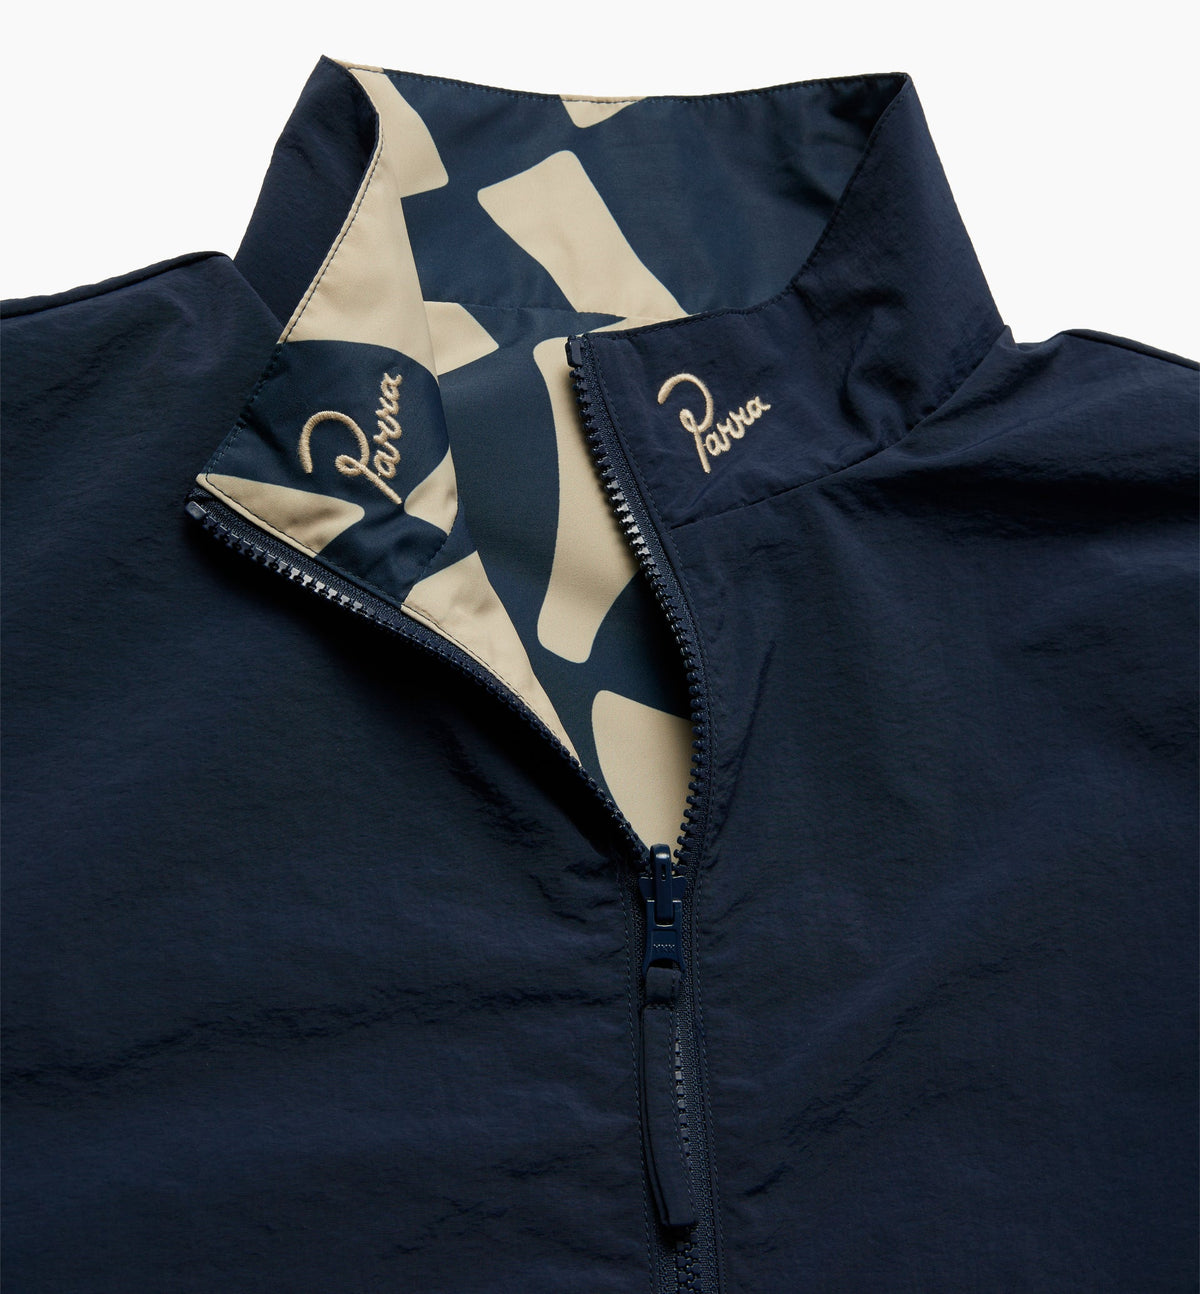 BY PARRA ZOOM WINDS REVERSIBLE TRACK JACKET